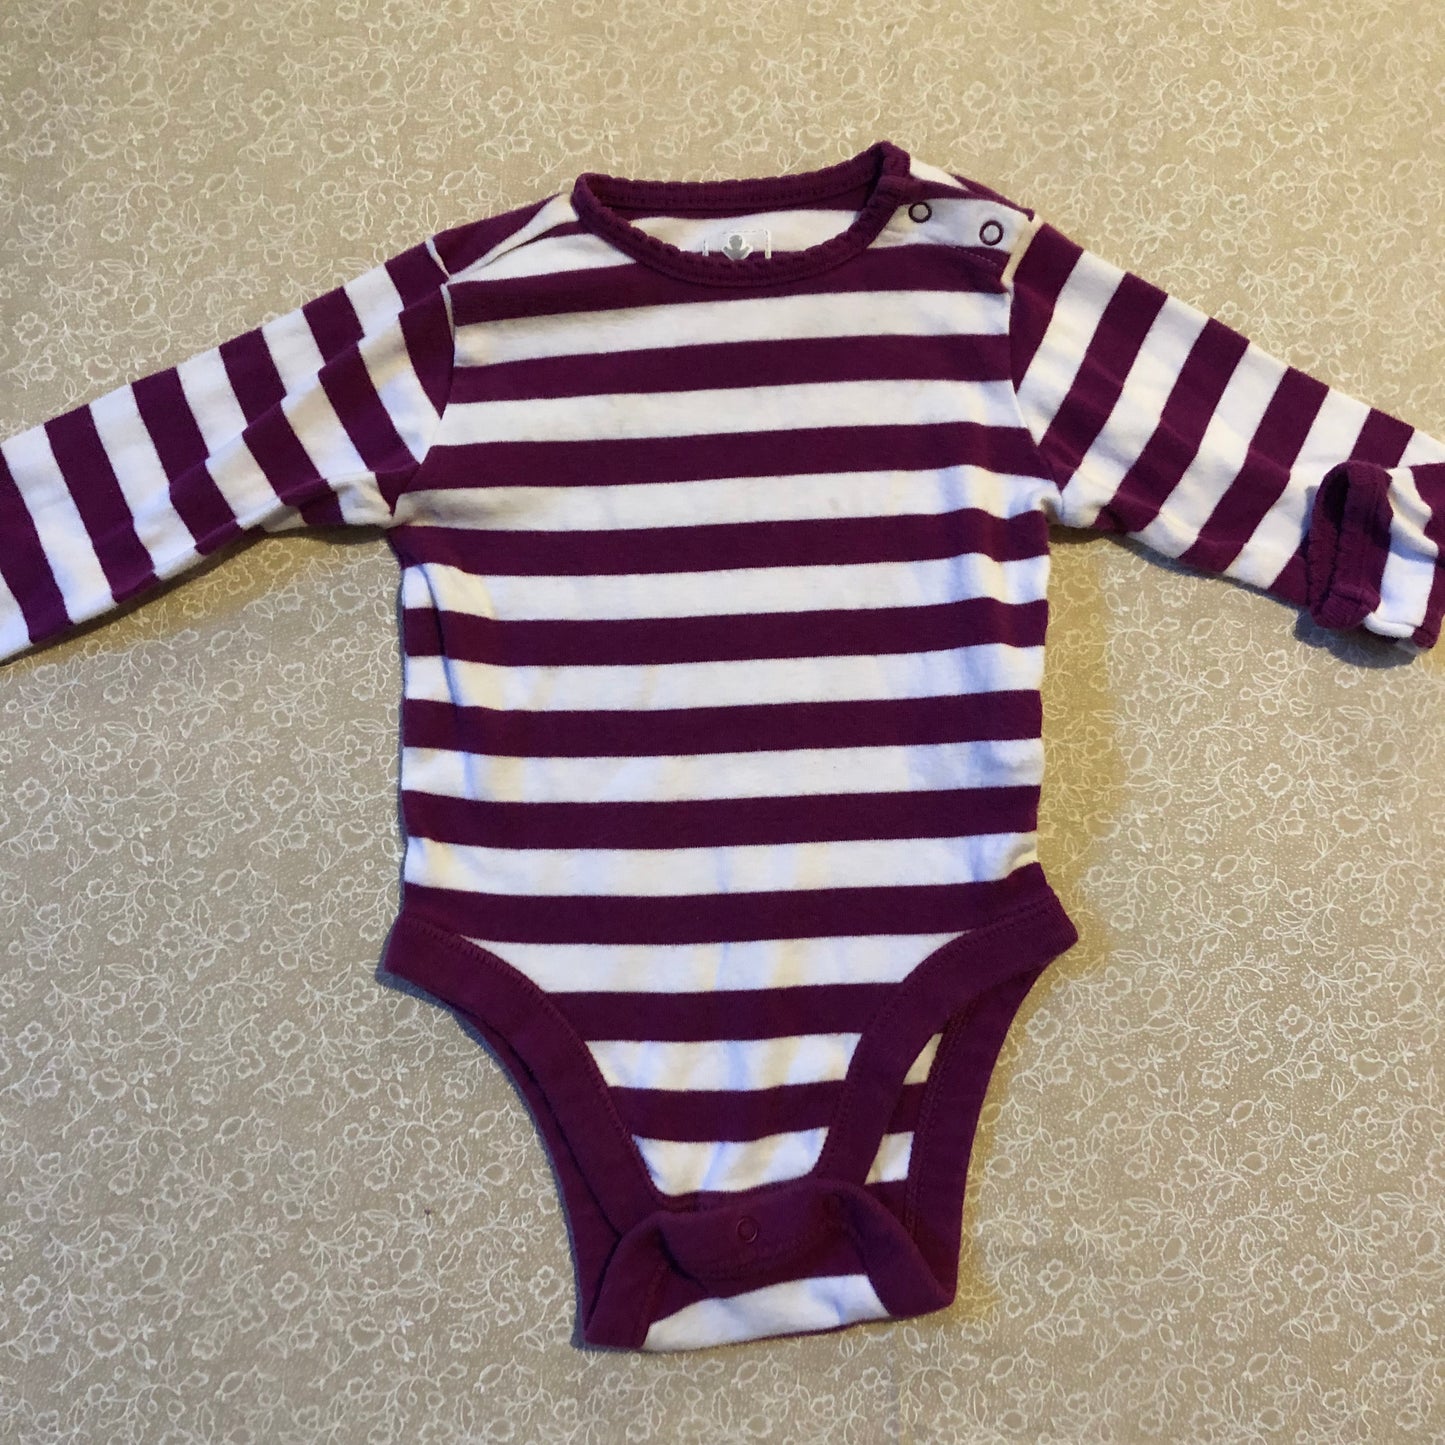 6-12-months-long-sleeve-diaper-shirts-old-navy-purple-white-stripes